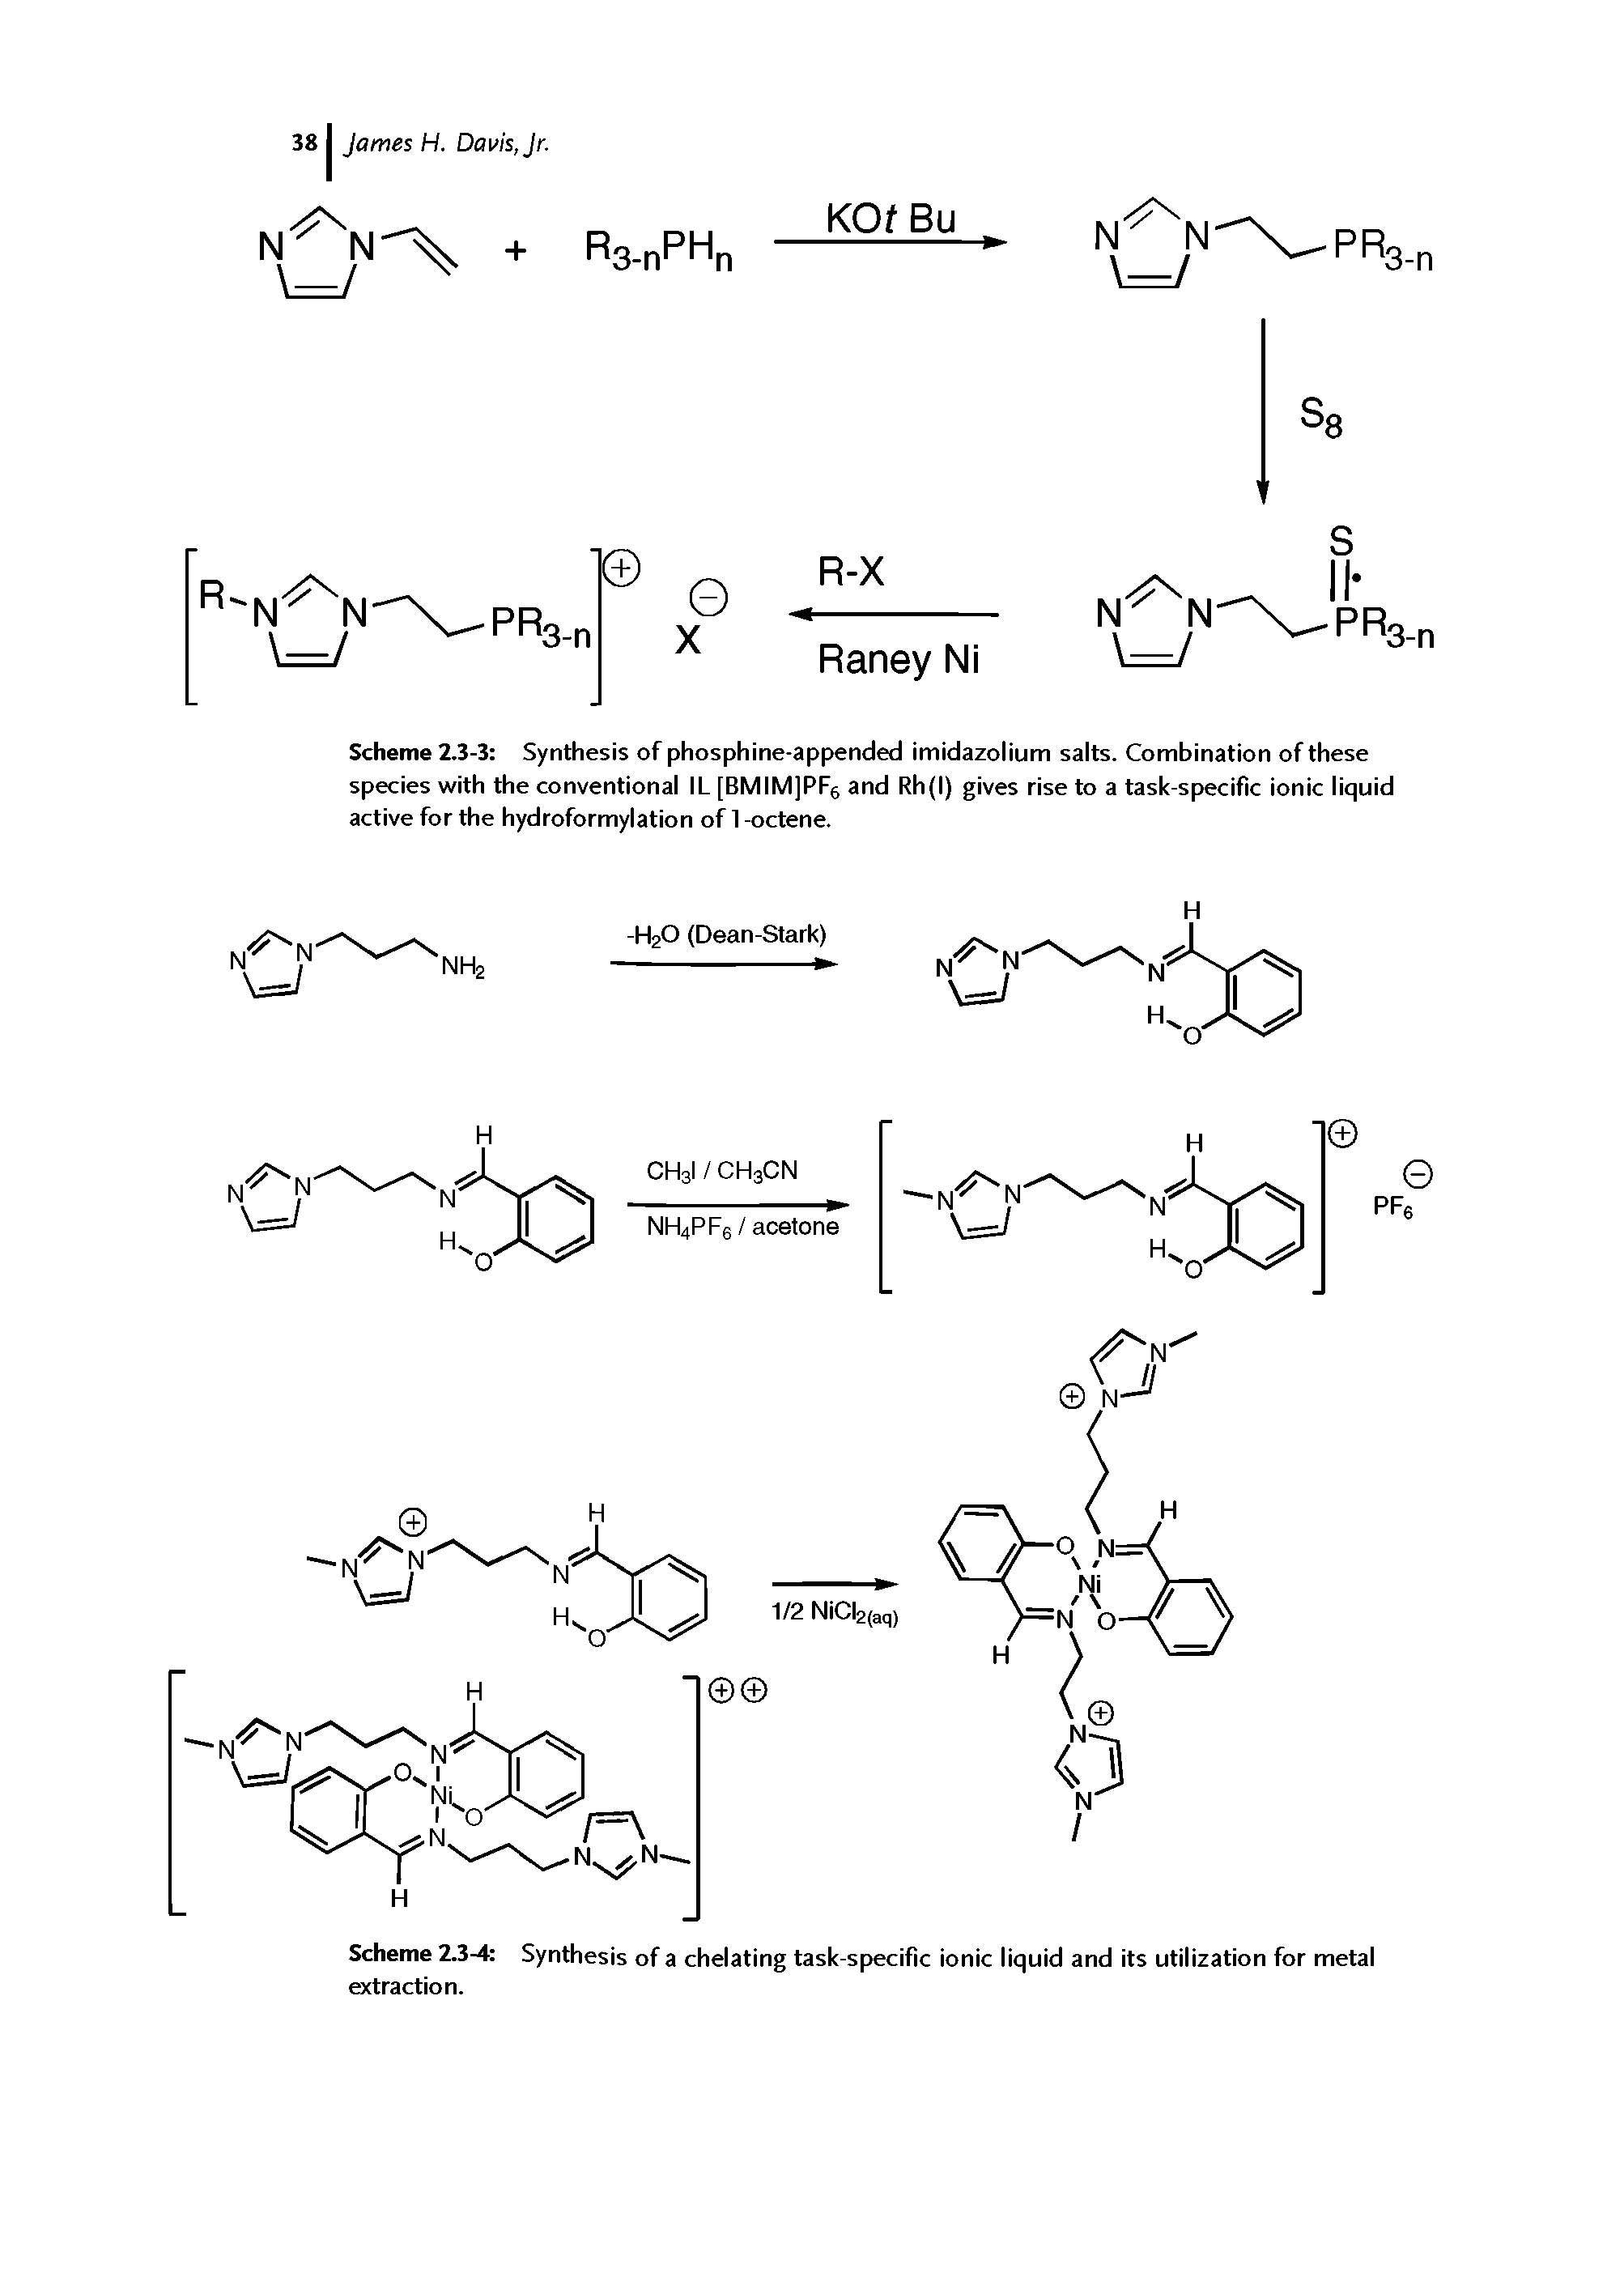 Scheme 2.3-3 Synthesis of phosphine-appended imidazolium salts. Combination of these species with the conventional IL [BMIMJPFe and Rh(l) gives rise to a task-specific ionic liquid active for the hydroformylation of 1 -octene.